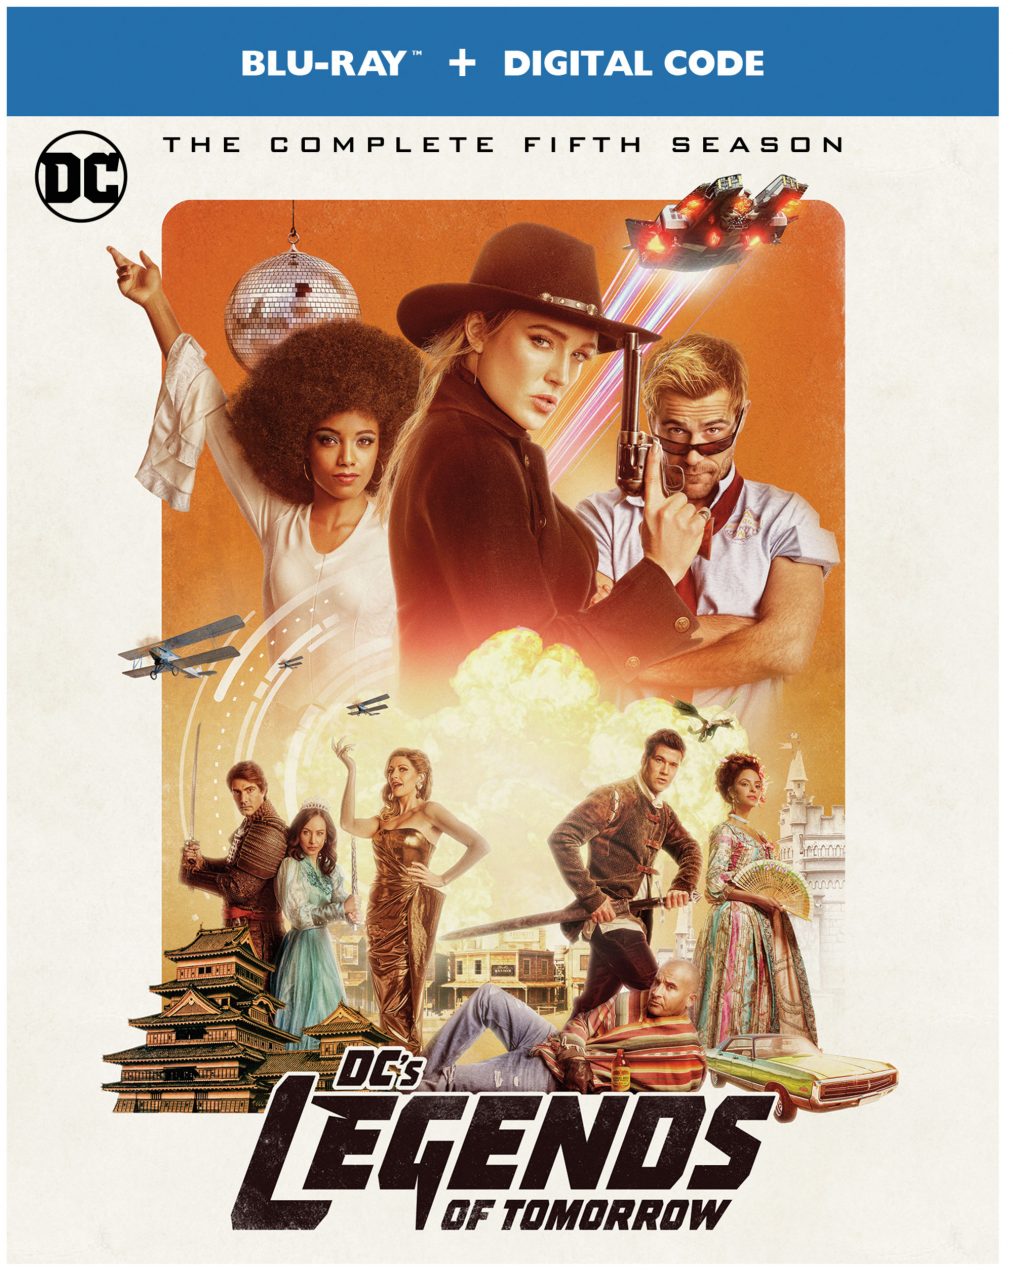 DC's Legends Of Tomorrow: The Complete Fifth Season Blu-Ray cover (Warner Bros. Home Entertainment)